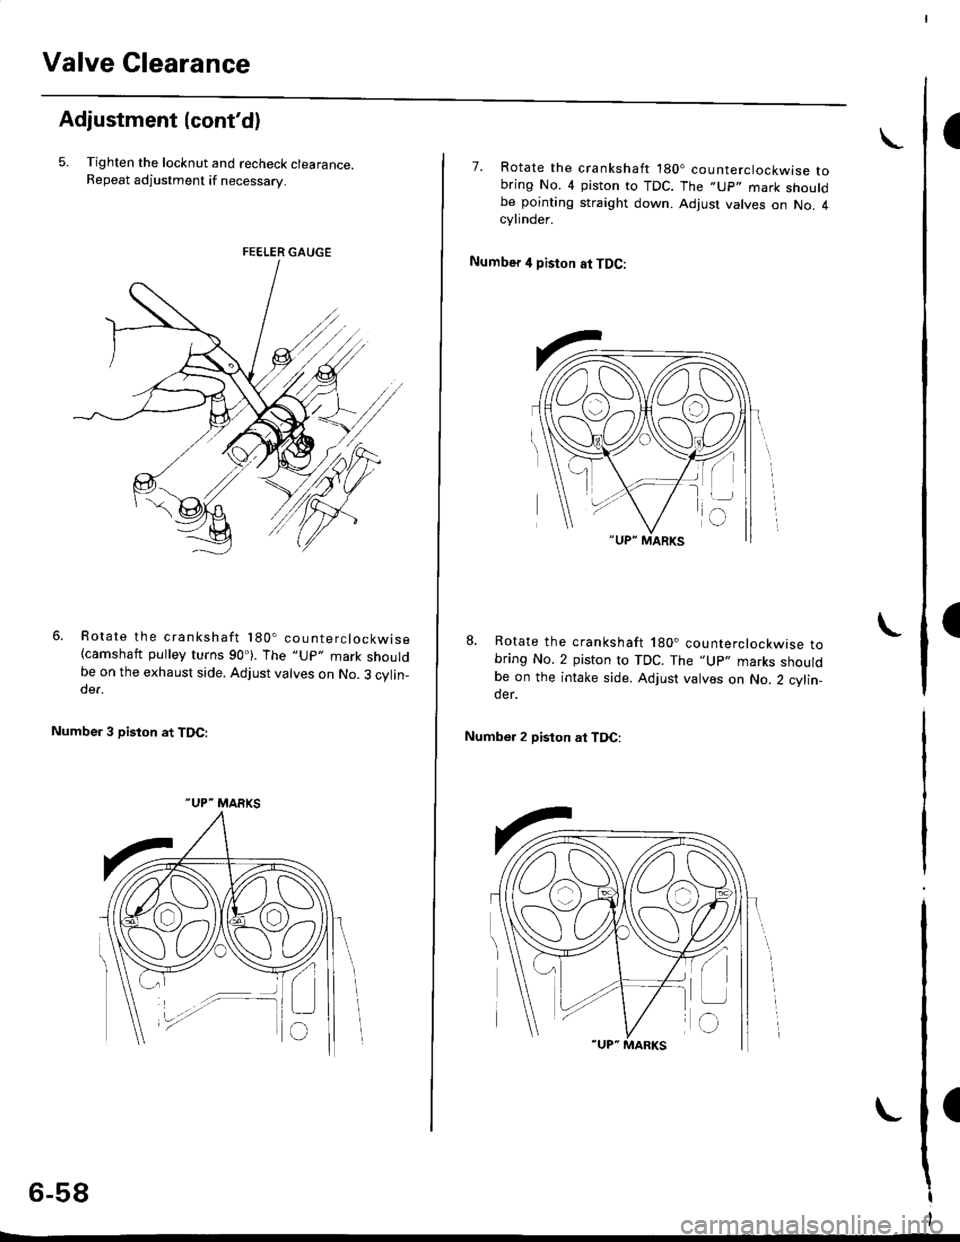 HONDA CIVIC 1996 6.G Workshop Manual Valve Clearance
I
I
I
Adjustment {contd)
5. Tighten the locknut and recheck clearance.Repeat adjustment if necessary.
Rotate the crankshaft 180. counterclockwise(camshaft pulley turns 90). The "Up" 